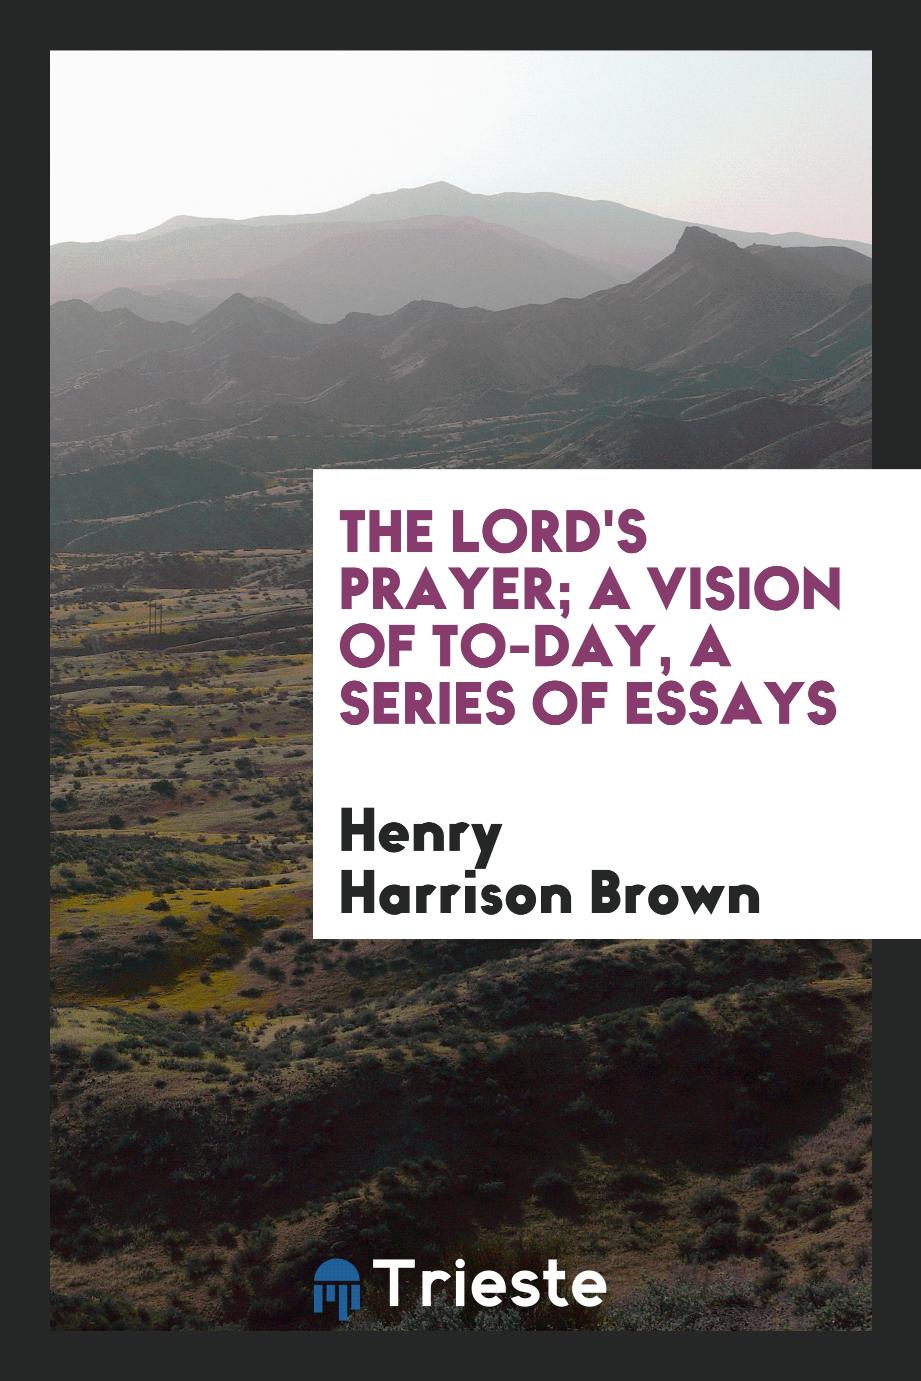 The Lord's prayer; a vision of to-day, a series of essays